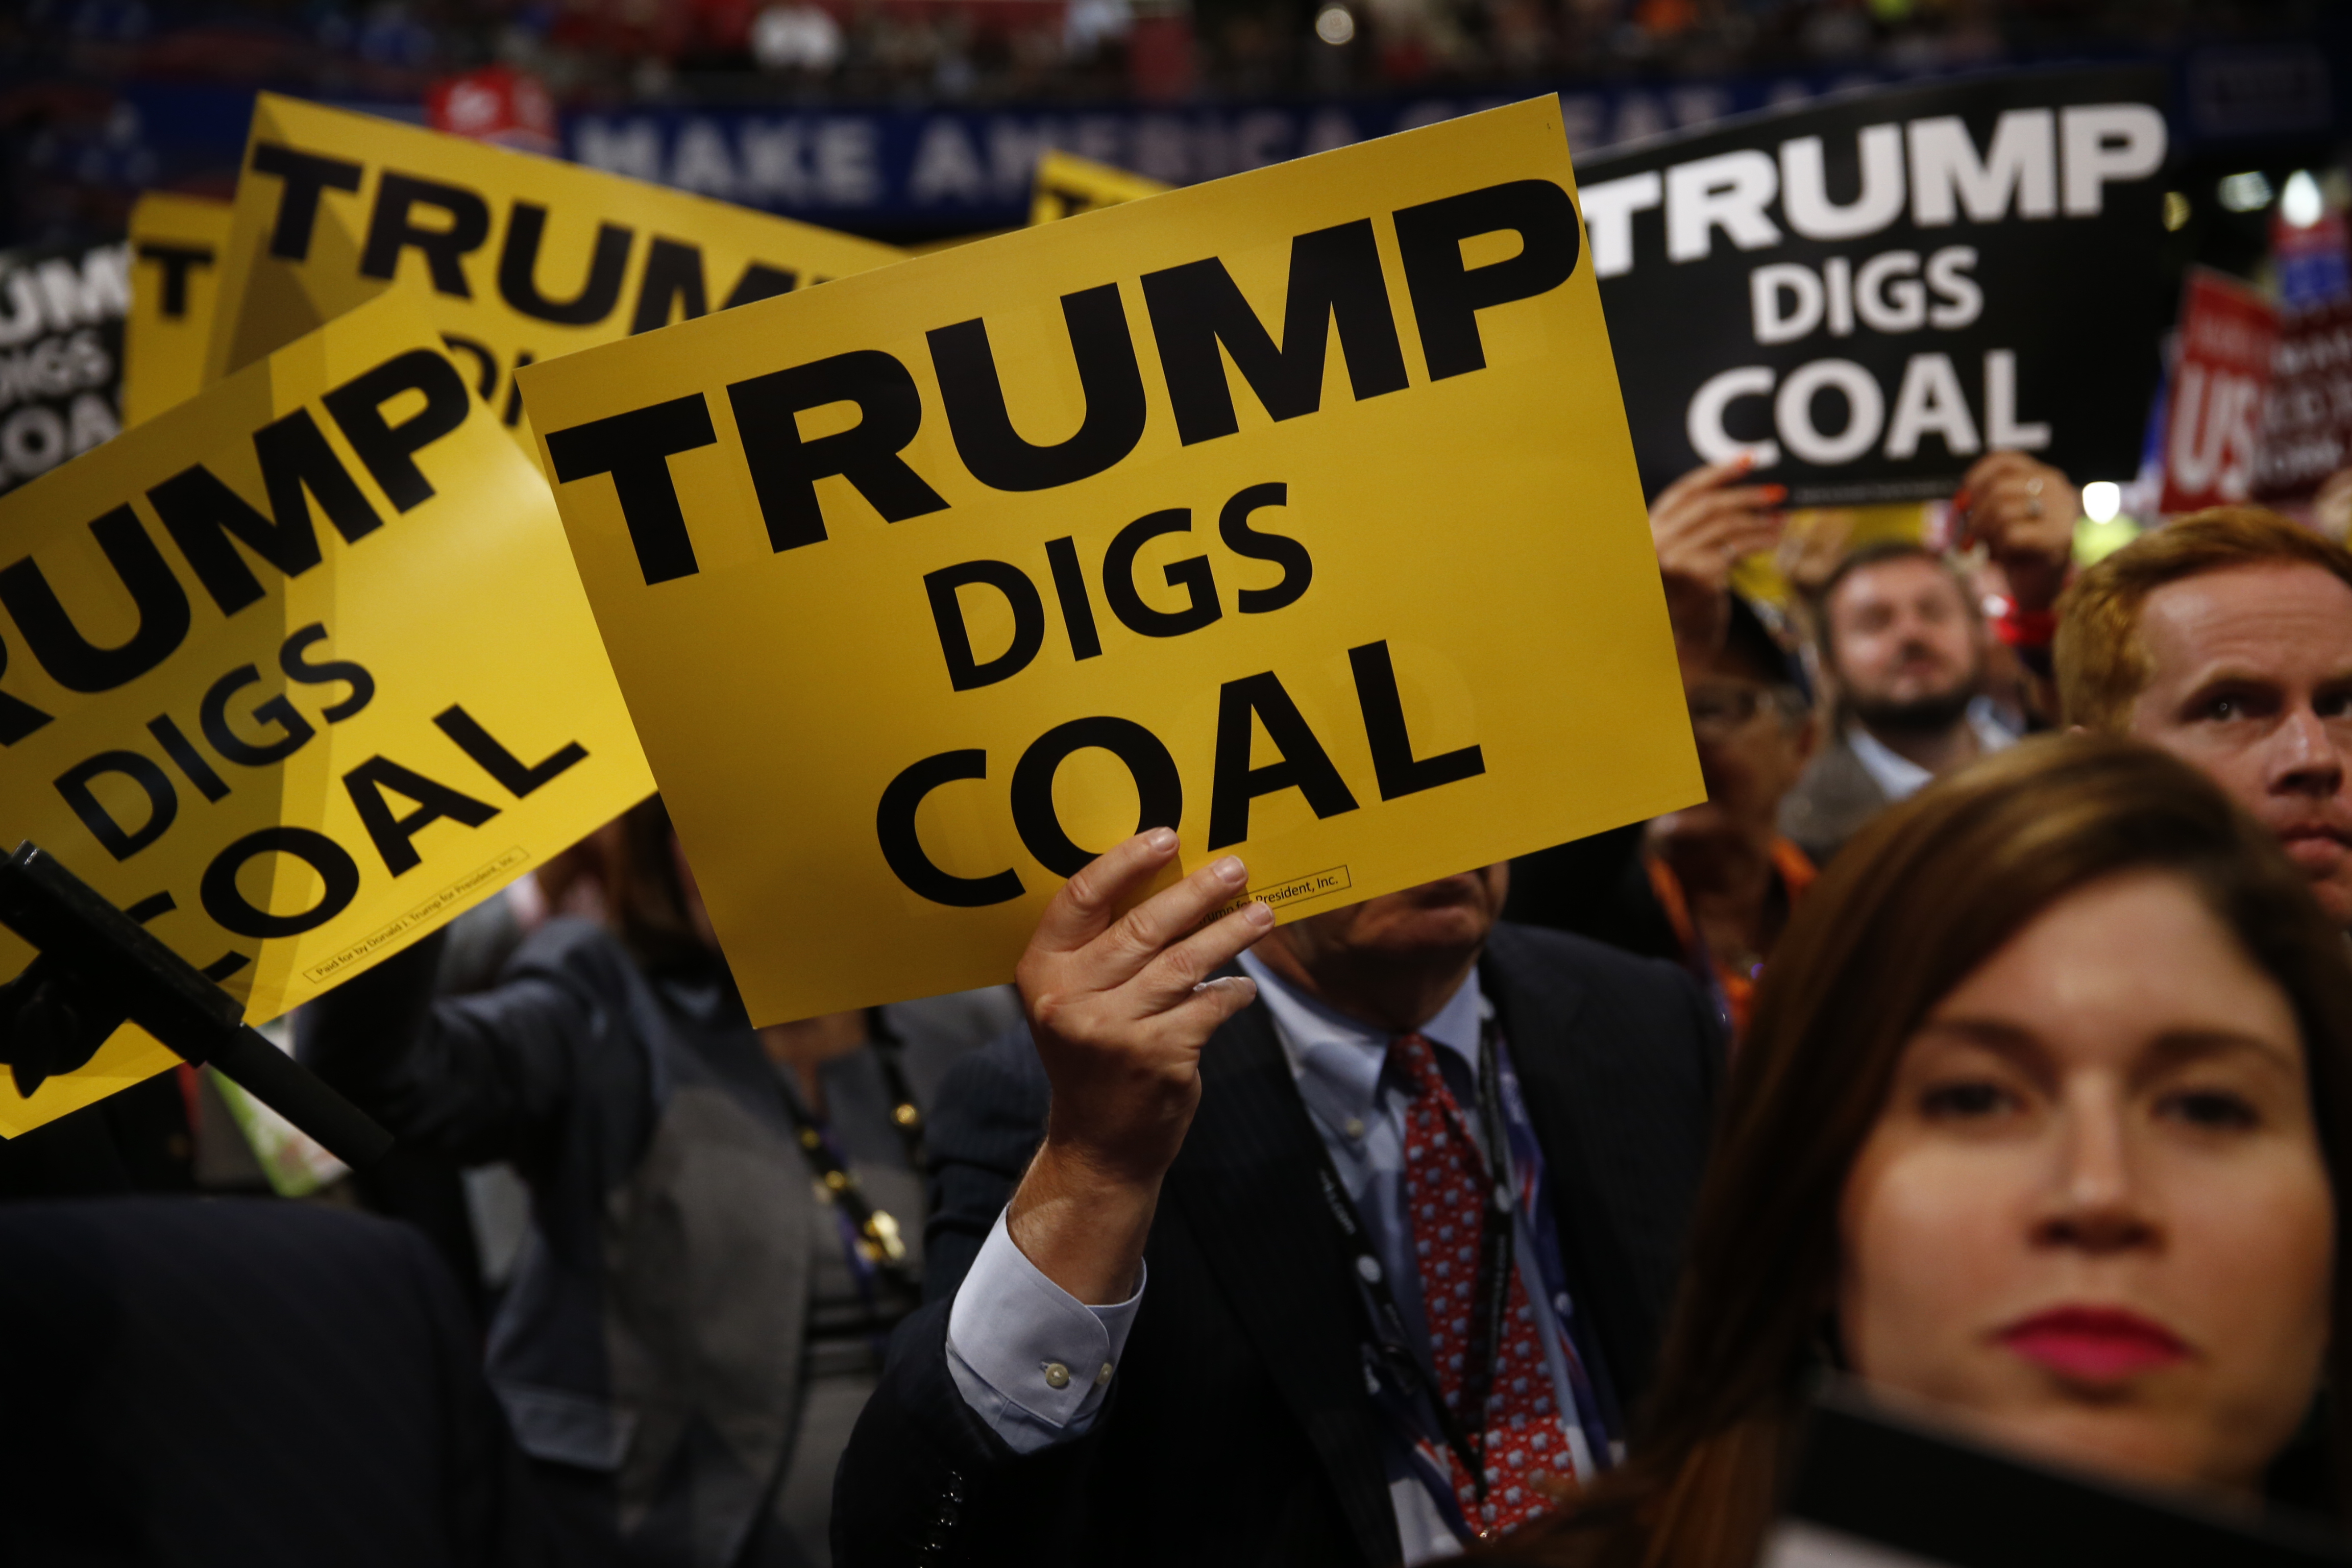 Delegates hold signs reading "Trump Digs Coal" during the Republican National Convention (RNC) in Cleveland, Ohio, U.S., on July 19, 2016. (Bloomberg—Bloomberg via Getty Images)